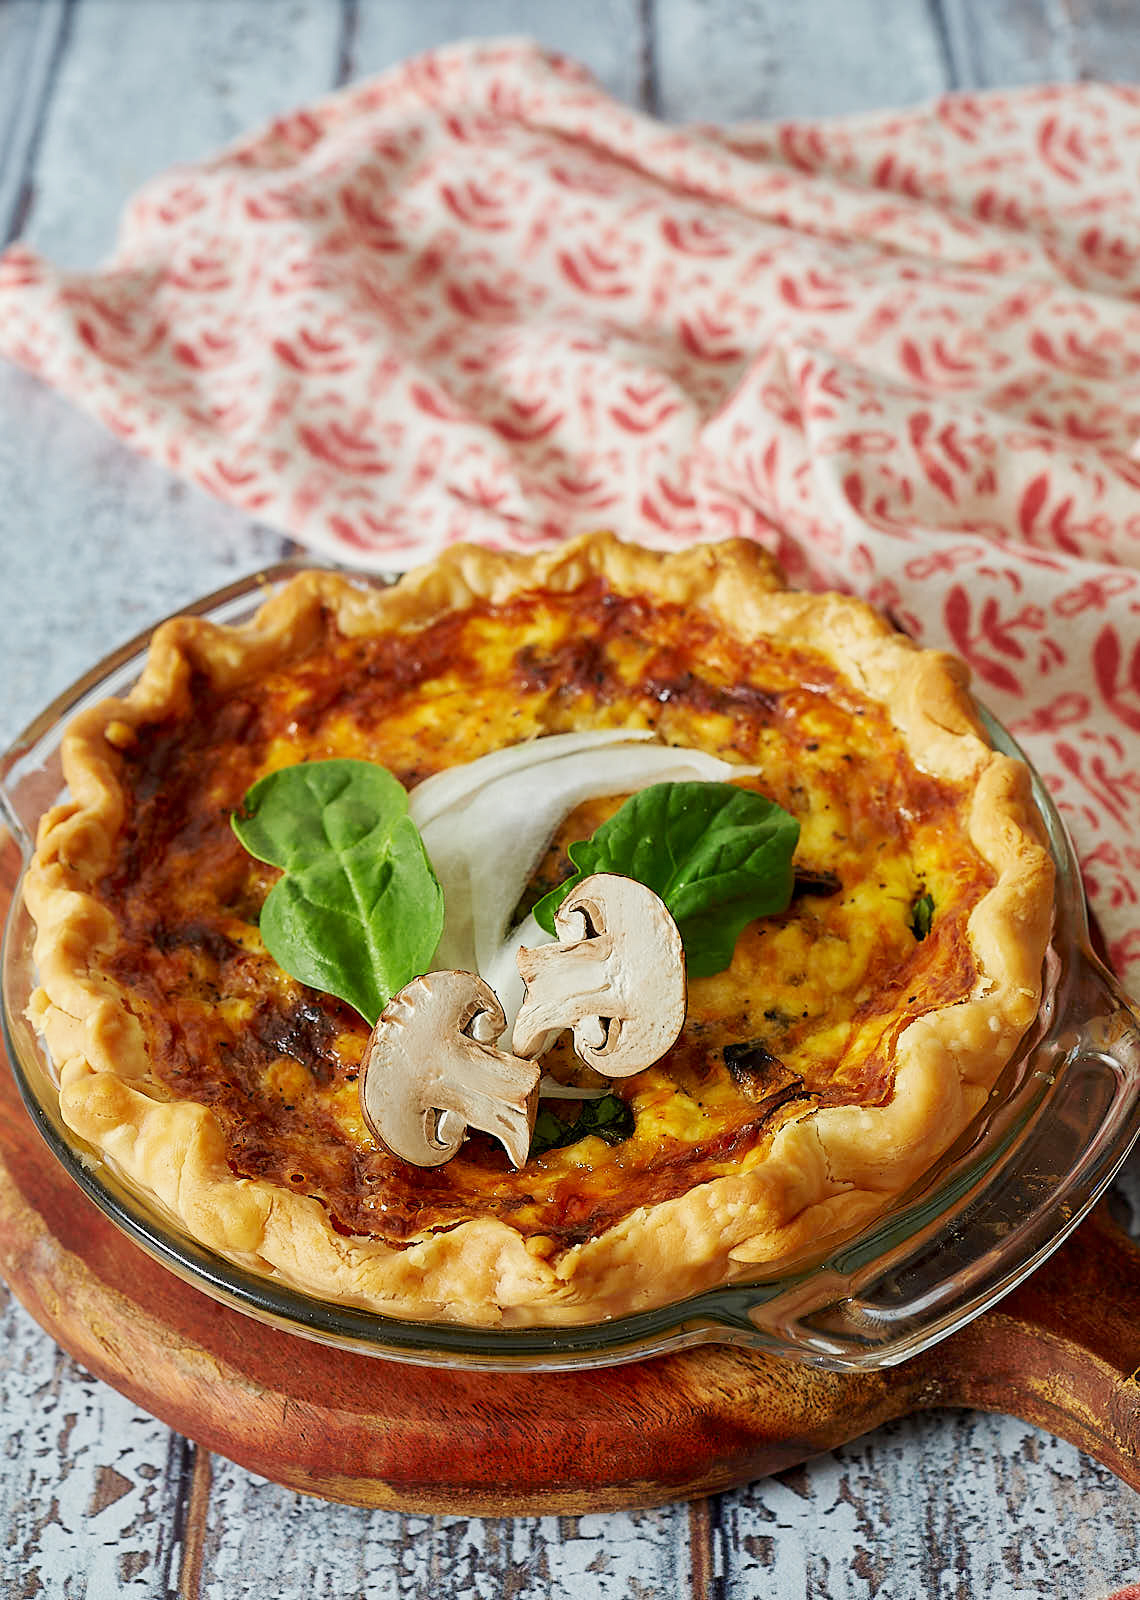 Quiche with mushrooms and spinach garnish.